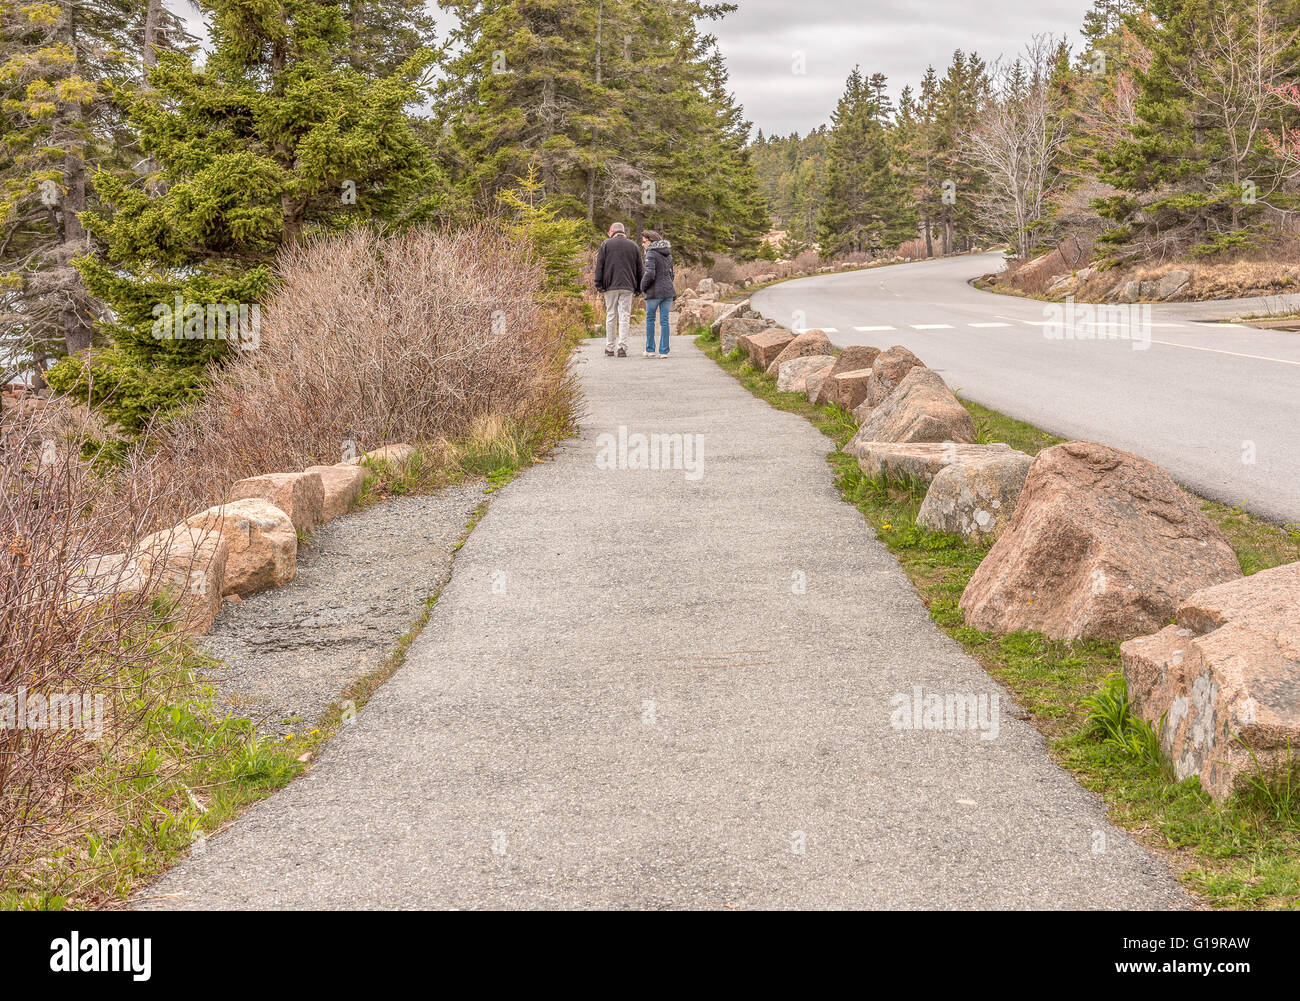 A couple taking an afternoon scenic walk in Acadia National Park, Bar Harbor, ME. Stock Photo